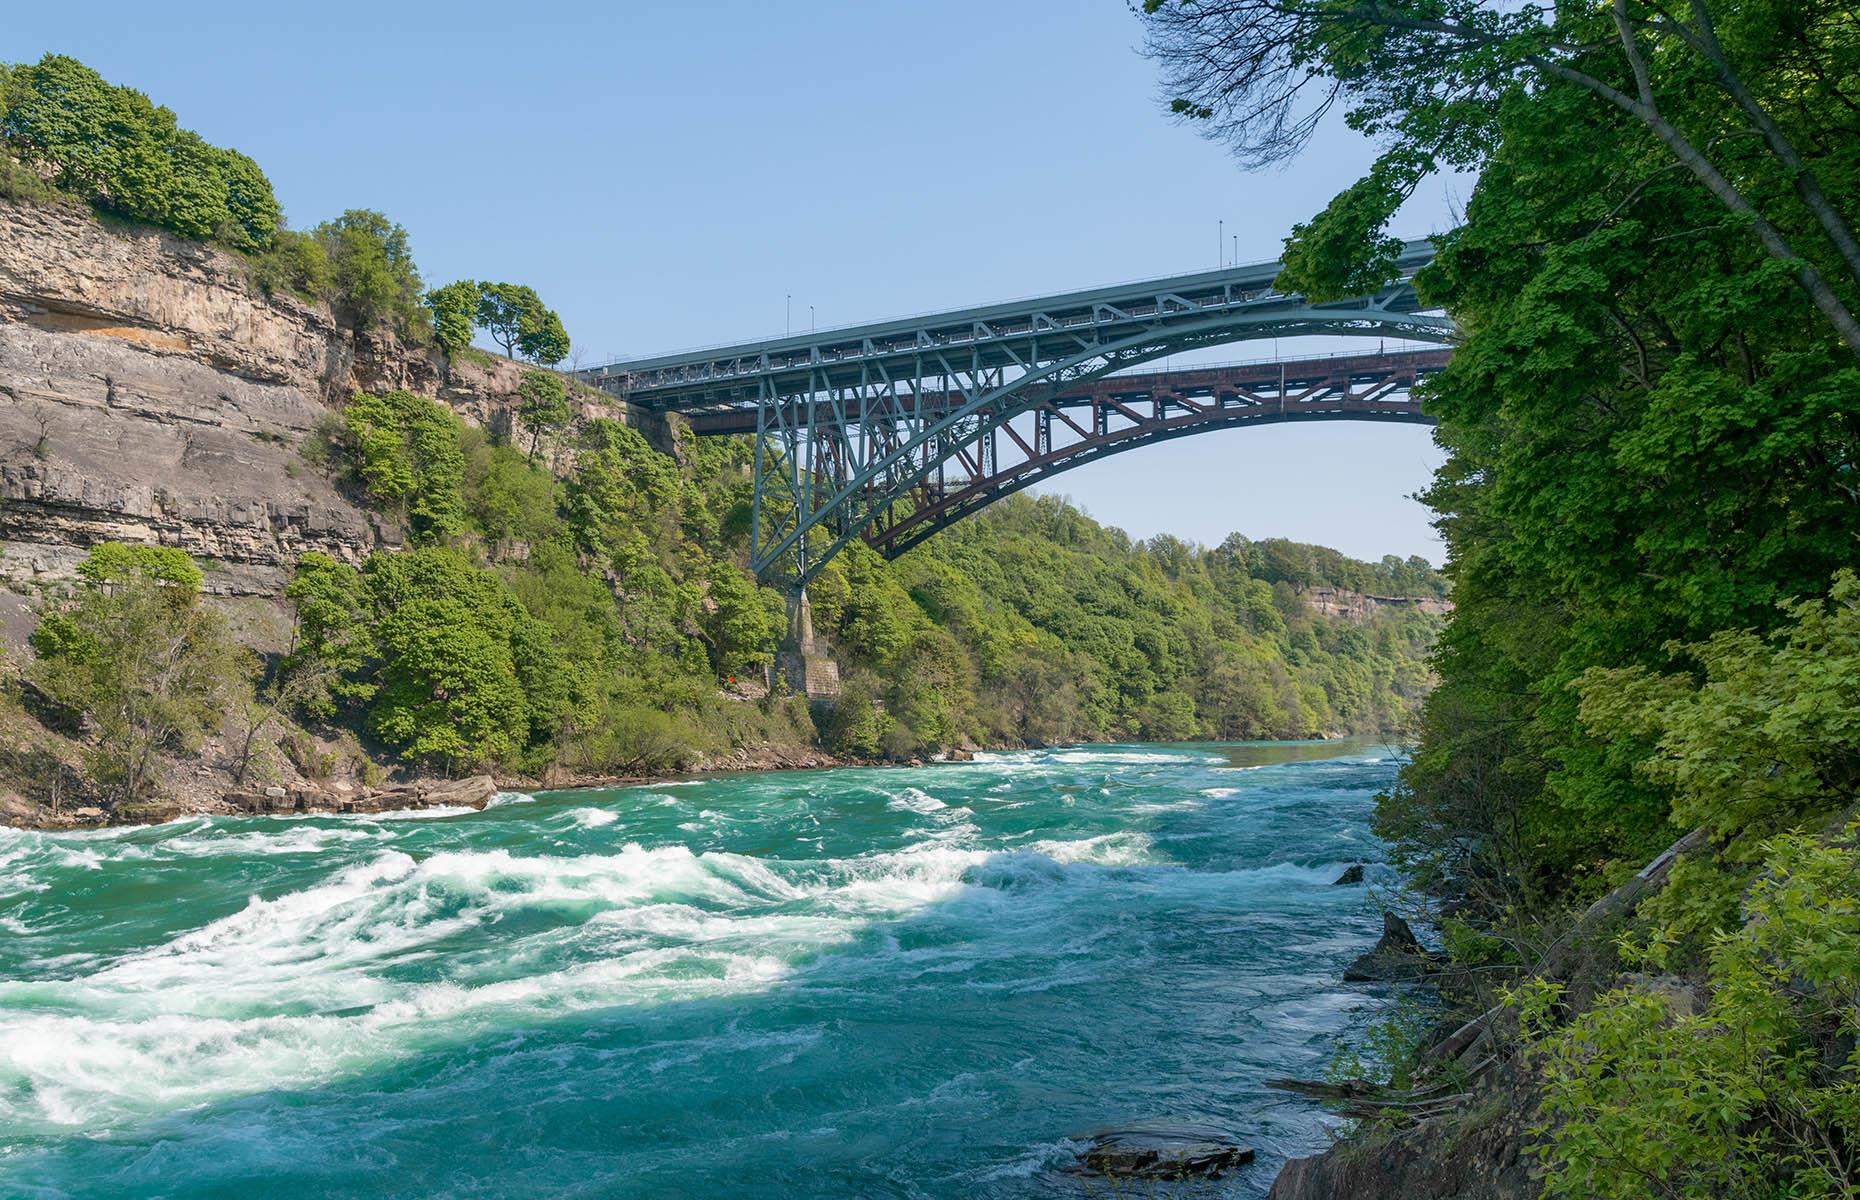 <p>Once you’re face-to-face with the Niagara River, take full advantage of the lookout points scattered throughout the quarter-mile (0.40km) boardwalk. When you get to the first platform, looking up river, get your camera out. The Whirlpool Rapids Railroad Bridge will frame your shot perfectly.</p>  <p>The <a href="https://www.niagaraparks.com/visit/attractions/white-water-walk">self-guided tour</a> allows you to stop and read the stories and facts about the geology of the Great Gorge, as well as the plant and animal life surrounding it. Give the American tourists across the river a wave; you’ll spot a few doing a similar walk on the US side. </p>